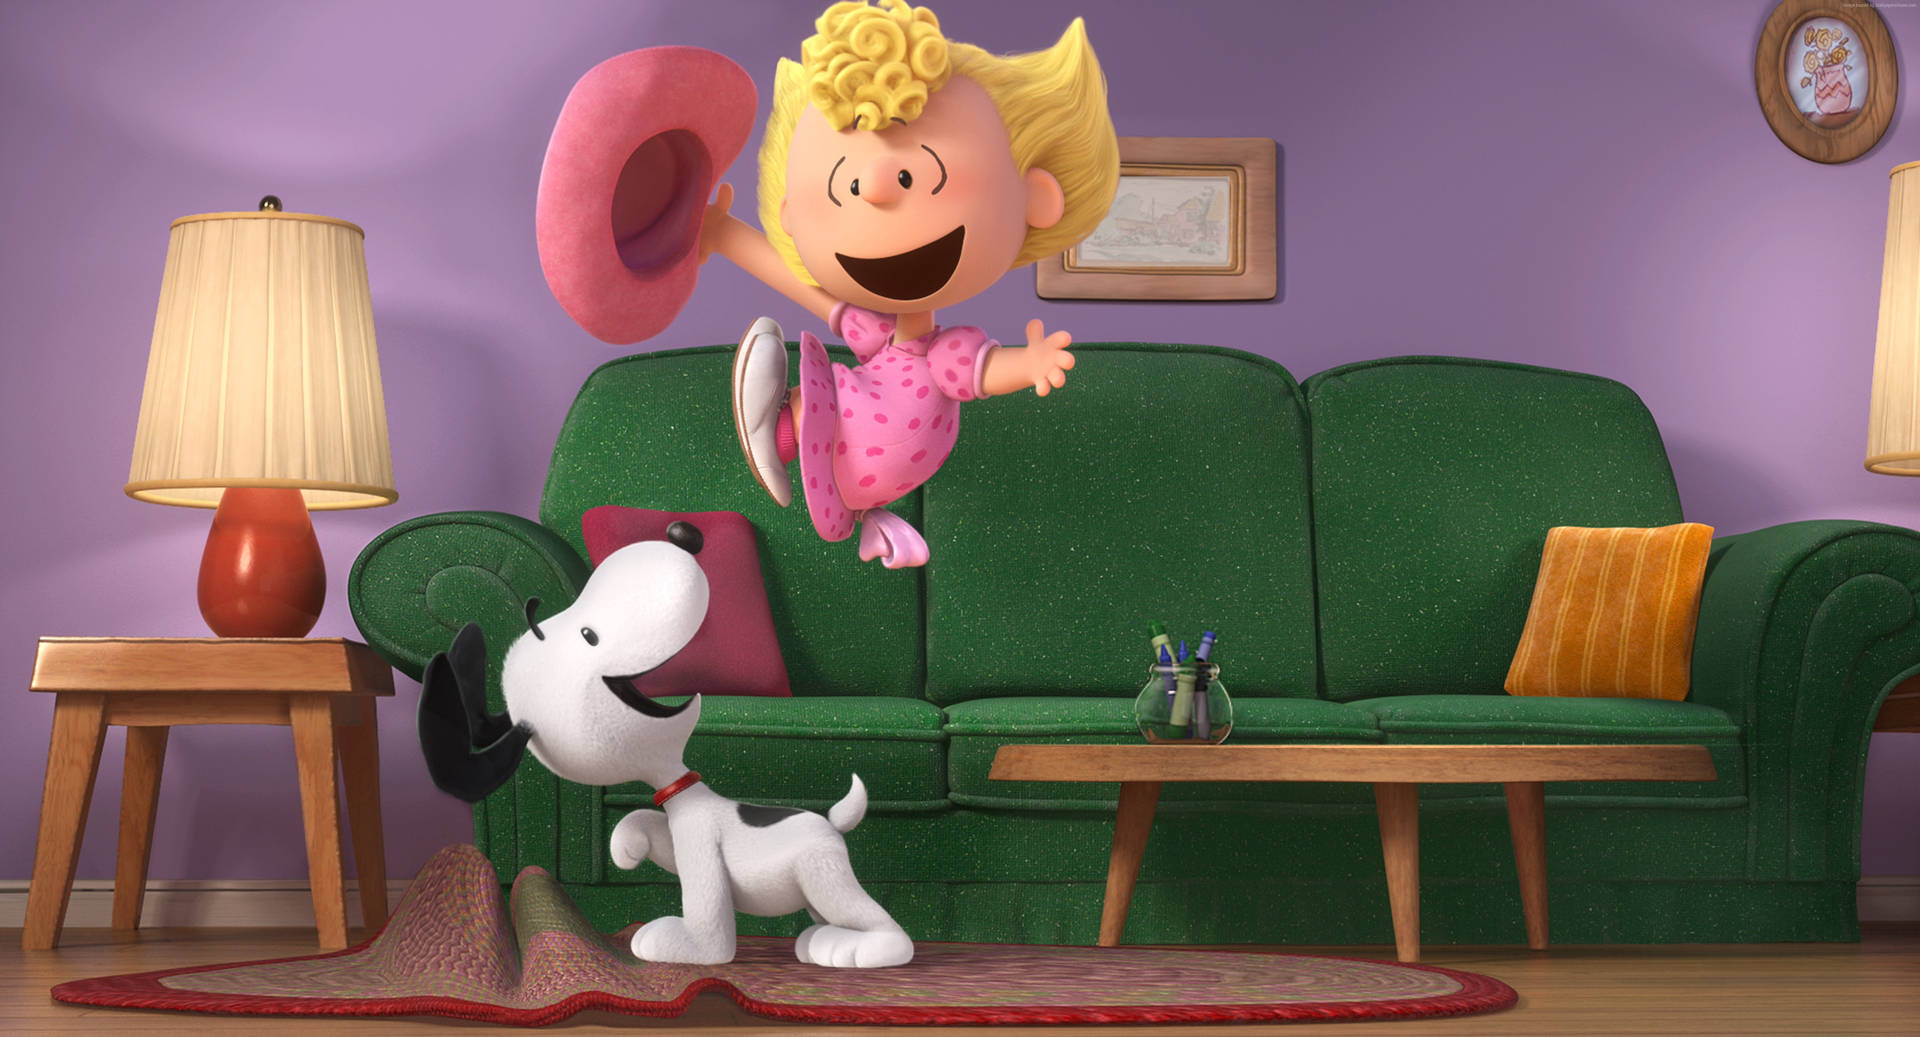 Peanuts Snoopy And Sally Wallpaper